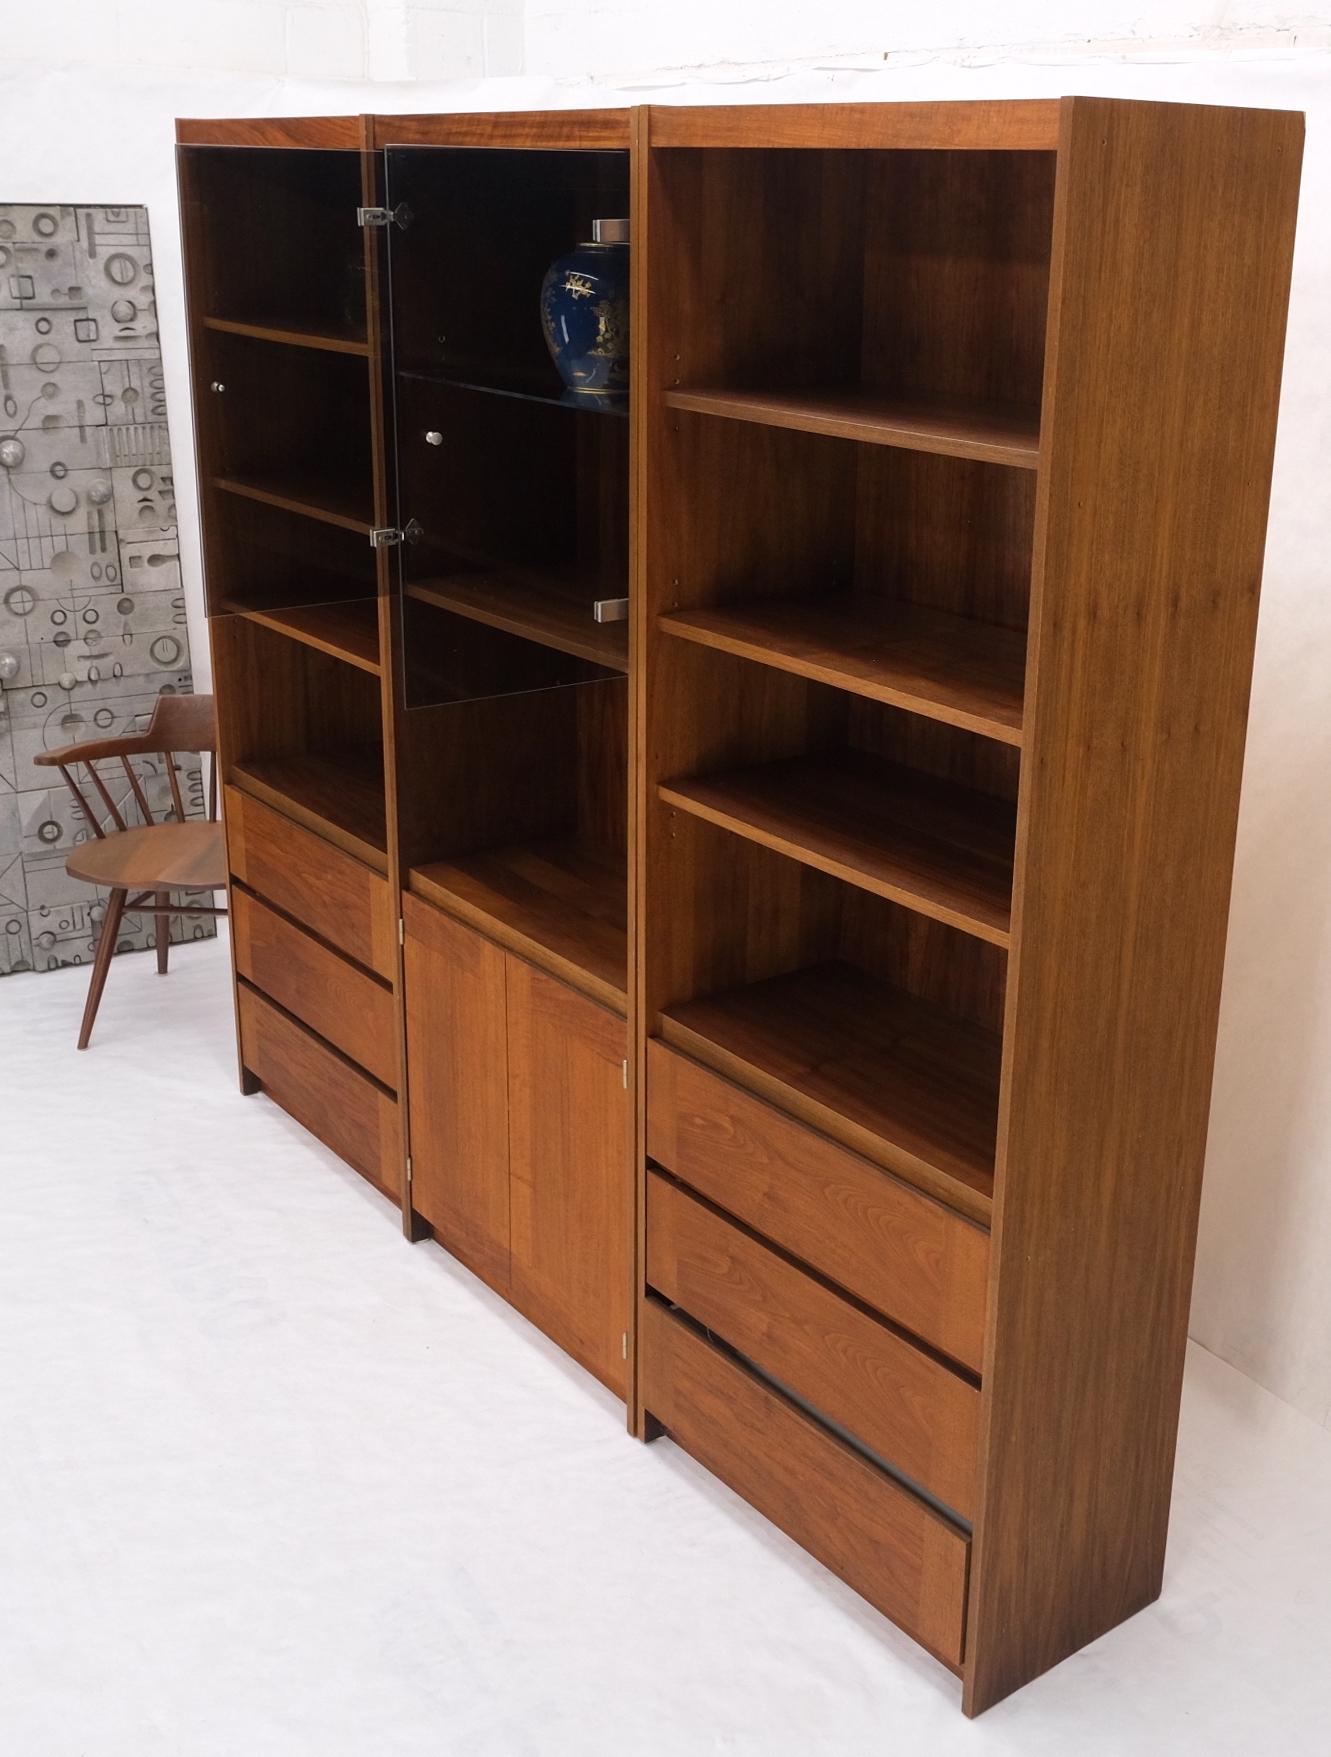 20th Century 3 Bay Mid-Mentury Modern Walnut Glass Doors Bookcase Wall Unit Curio Cabinet For Sale